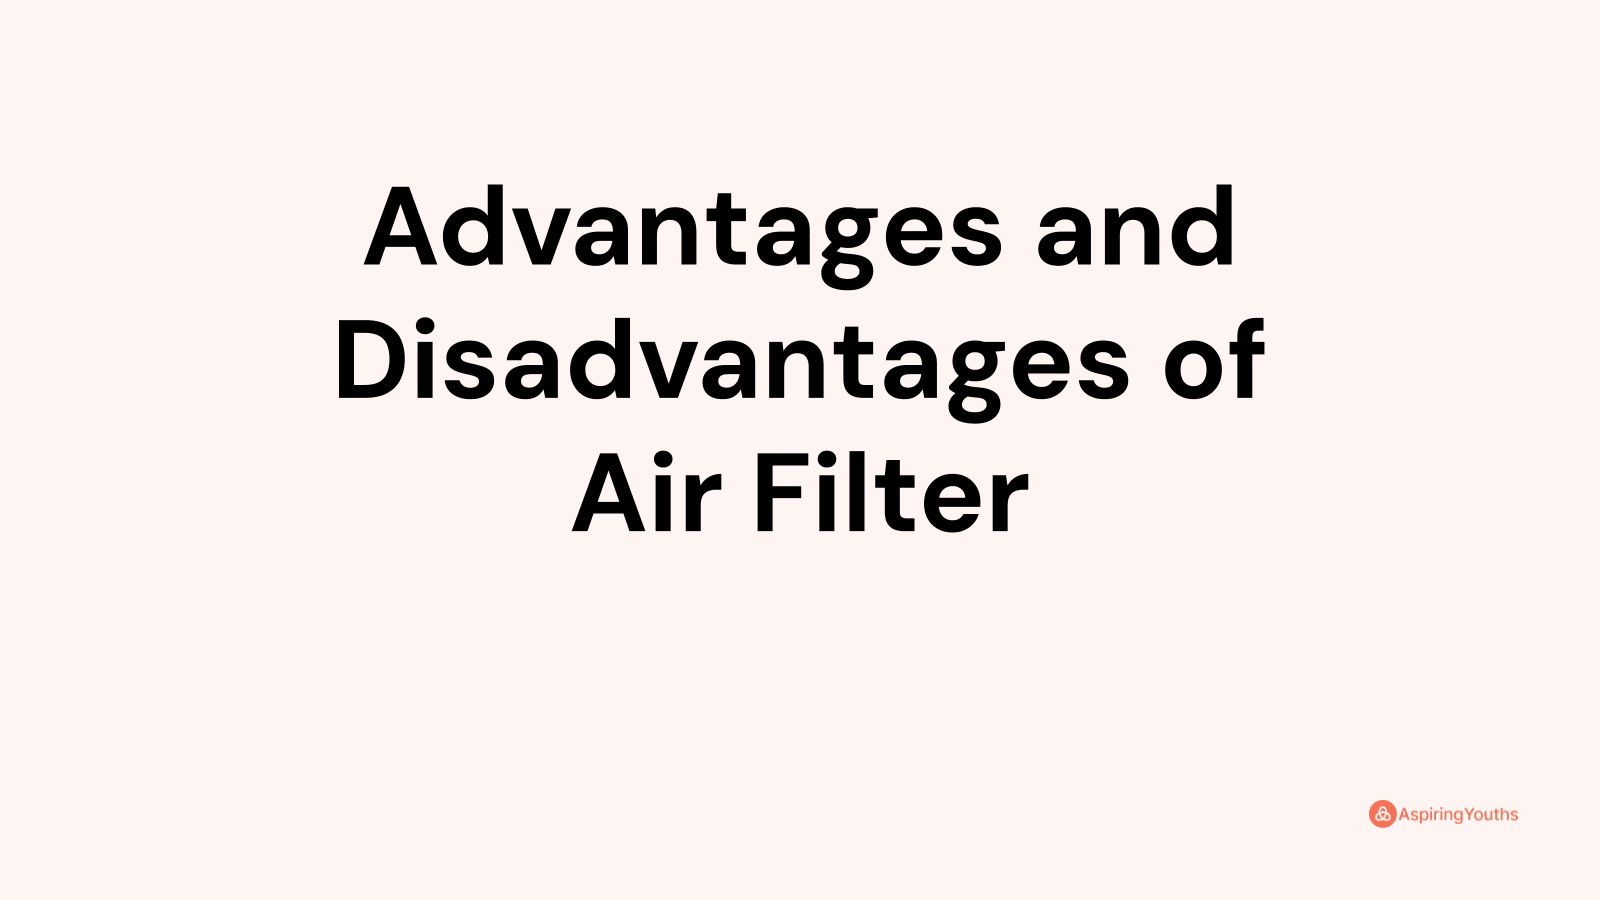 Advantages and disadvantages of Air Filter